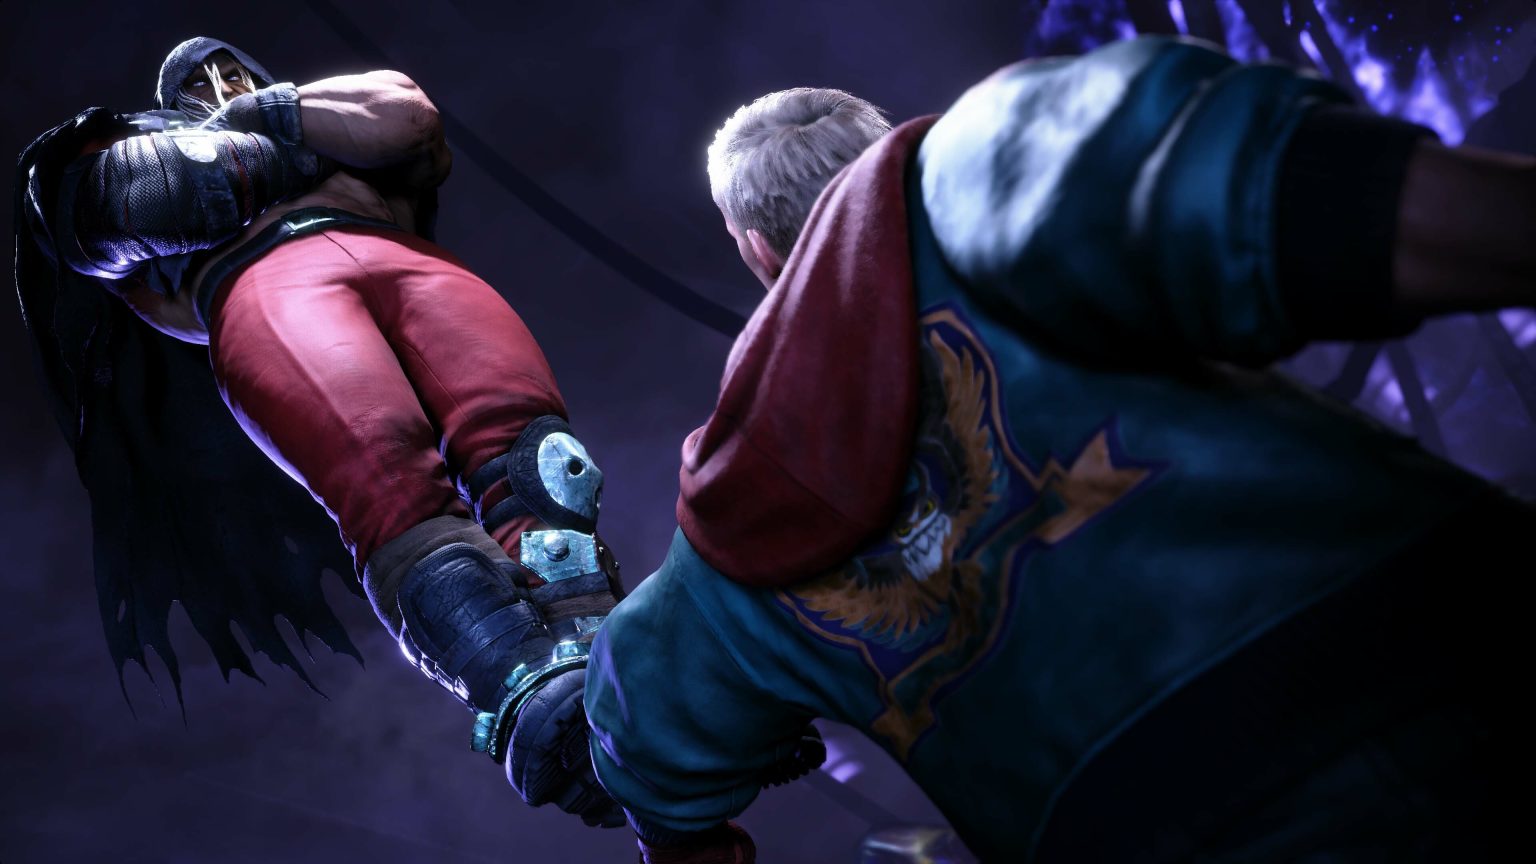 M. Bison will appear in Street Fighter 6 on 26th June with his classic moves